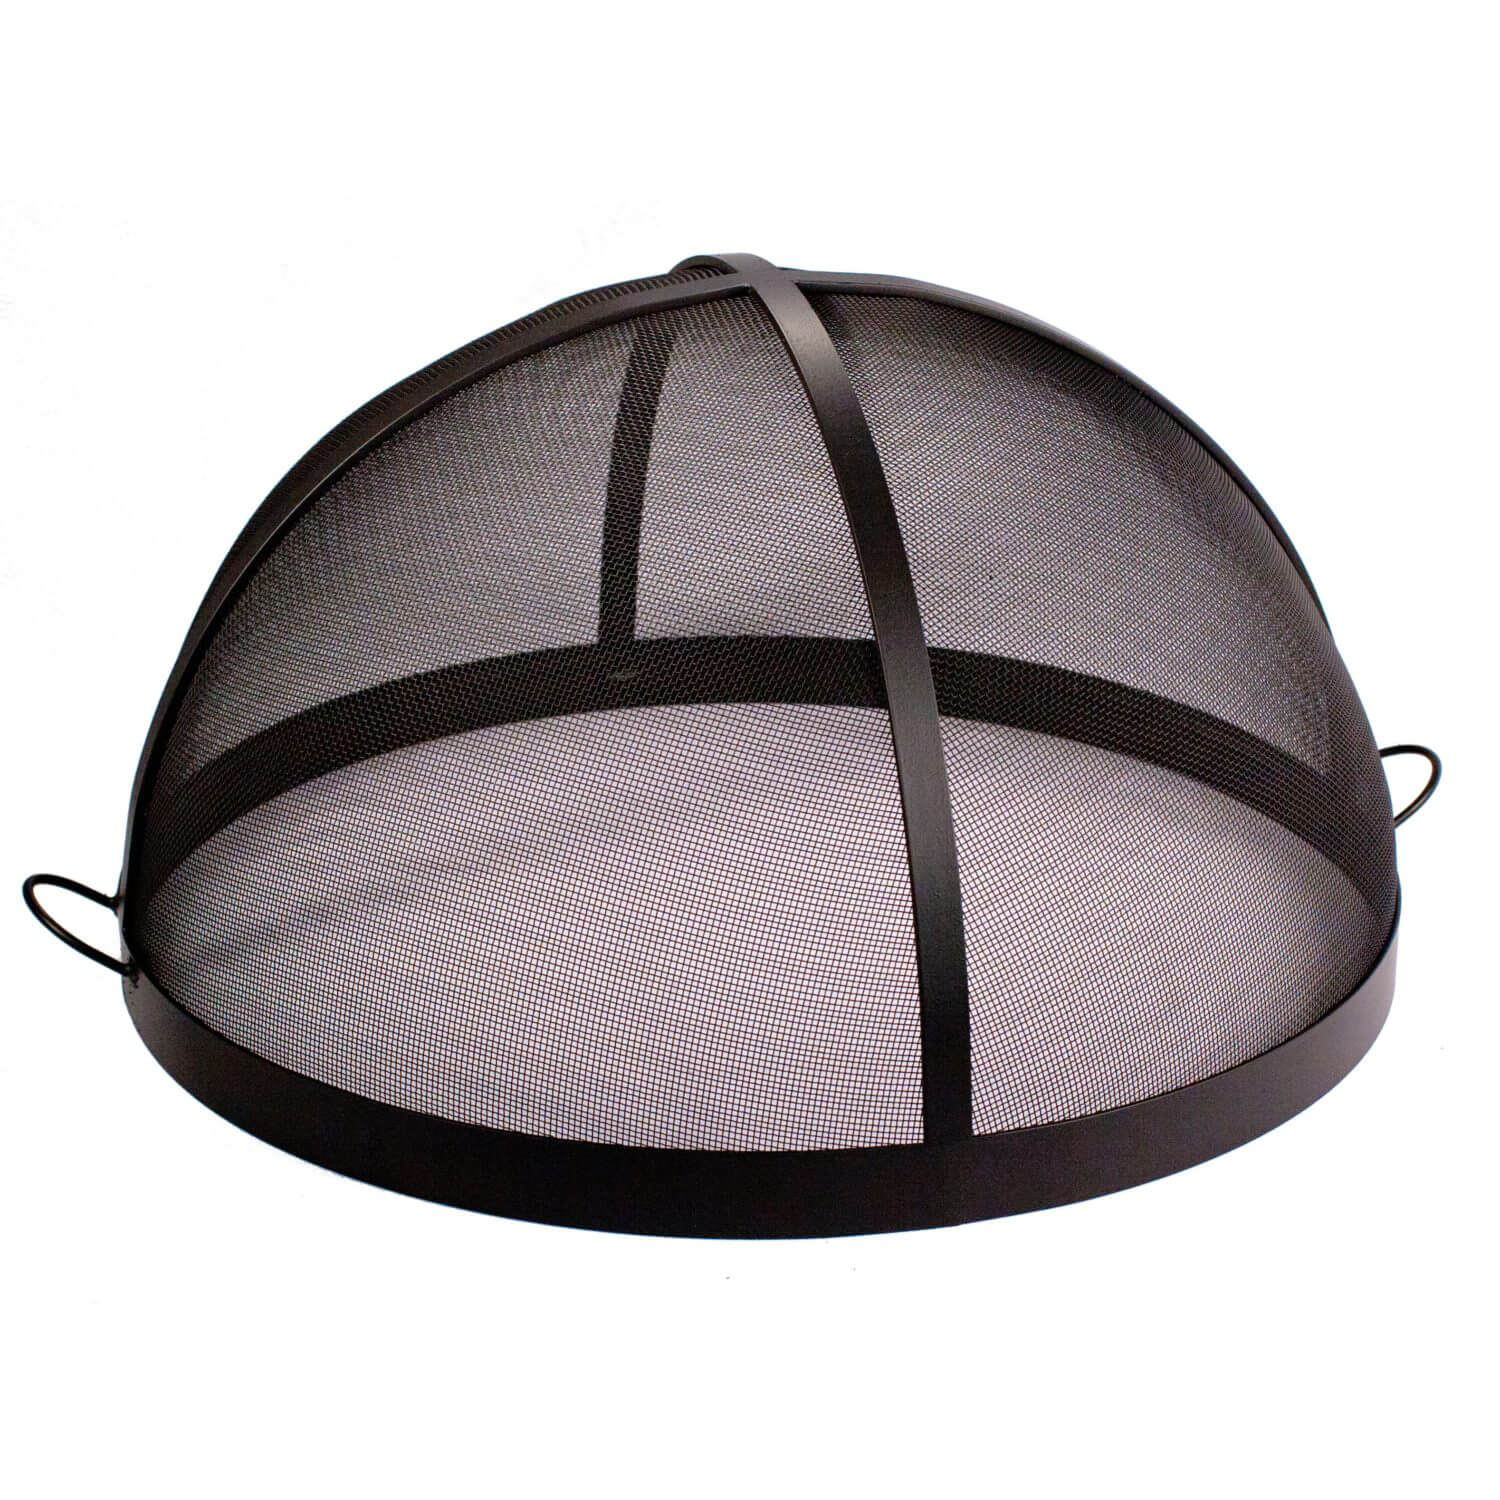 42 Dome Lift Off Fire Pit Screen, Fire Pit Dome Cover